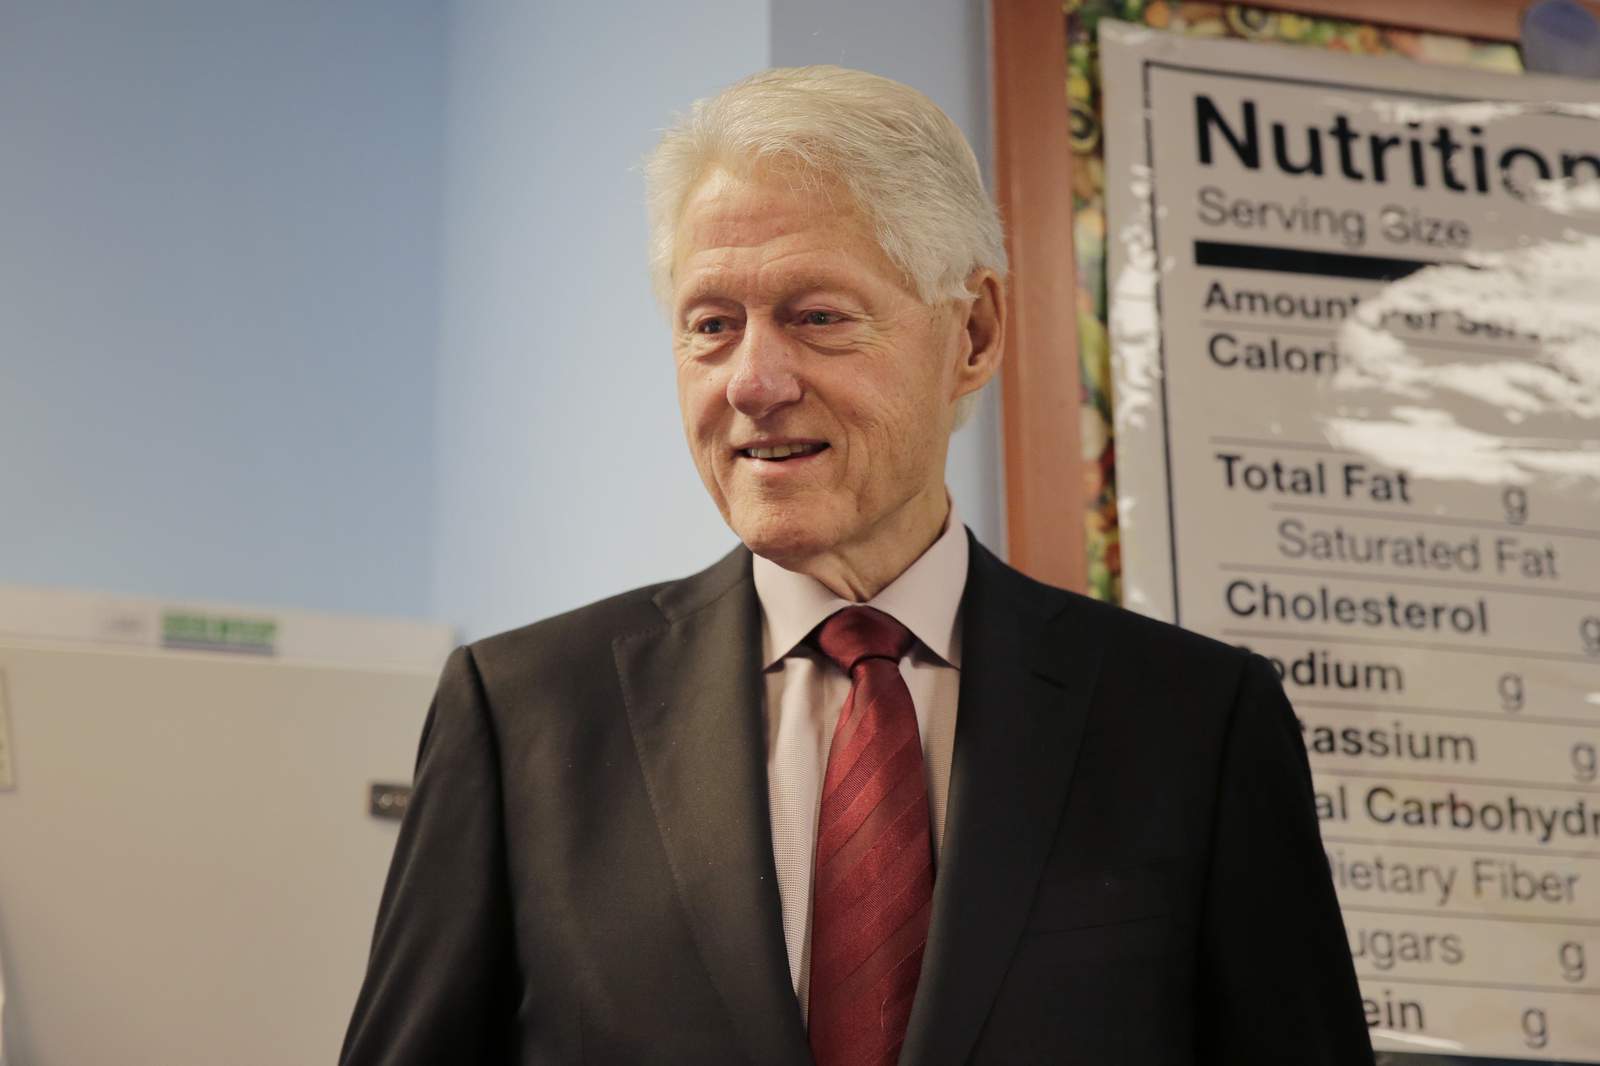 History channel working on doc series with Bill Clinton